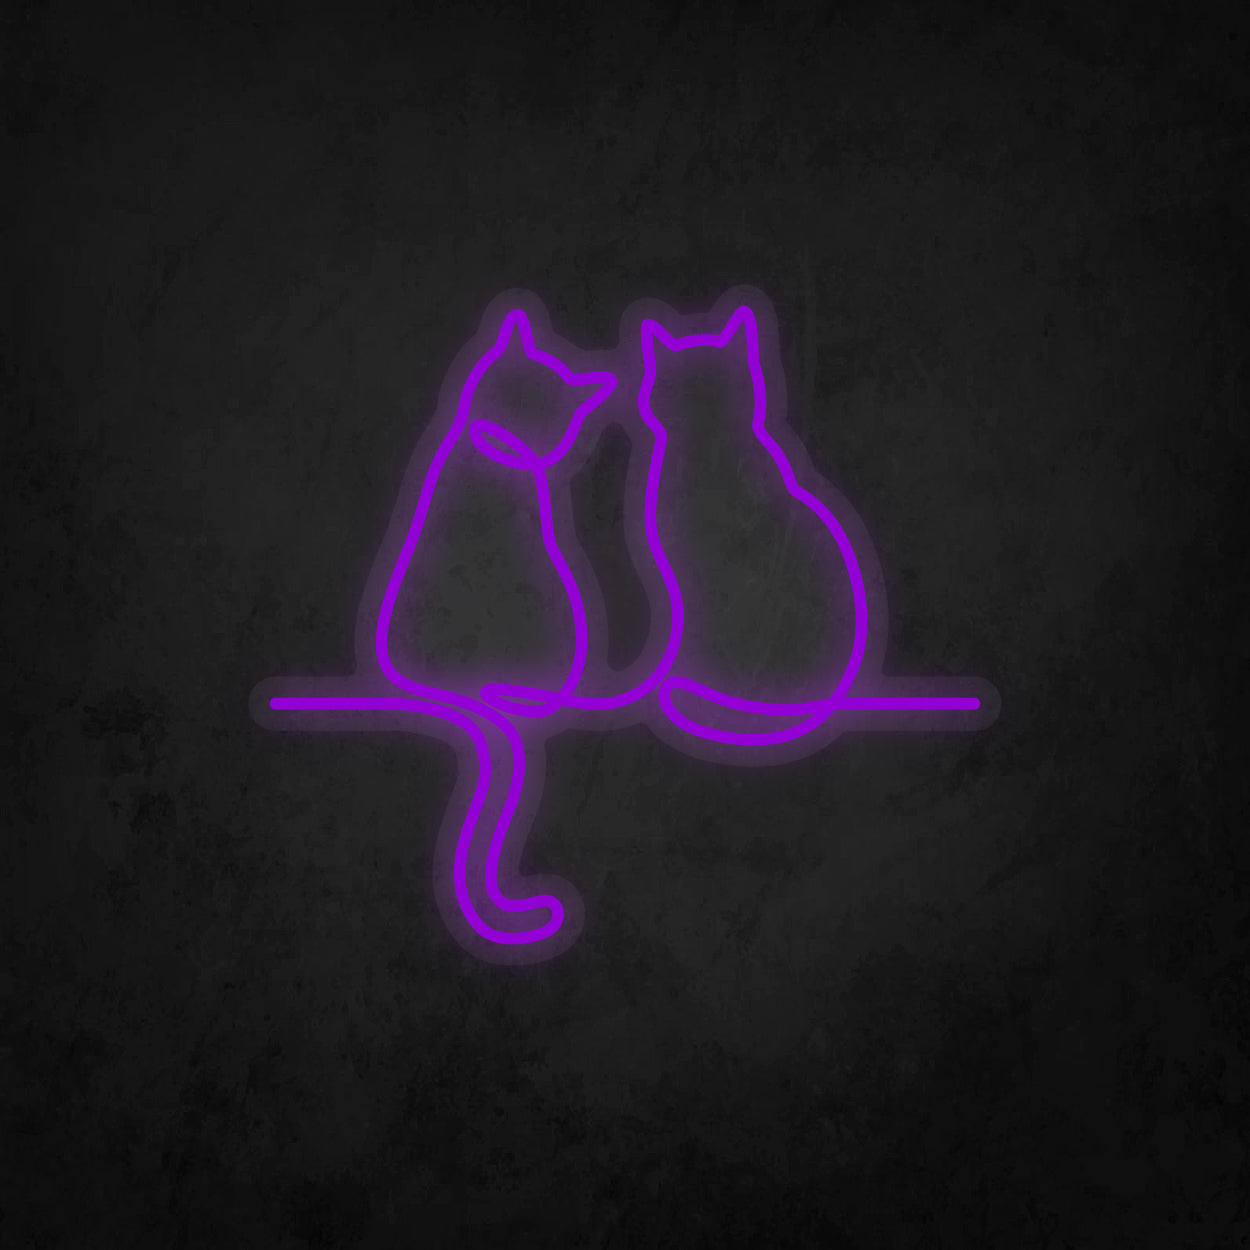 LED Neon Sign - Cat Couple